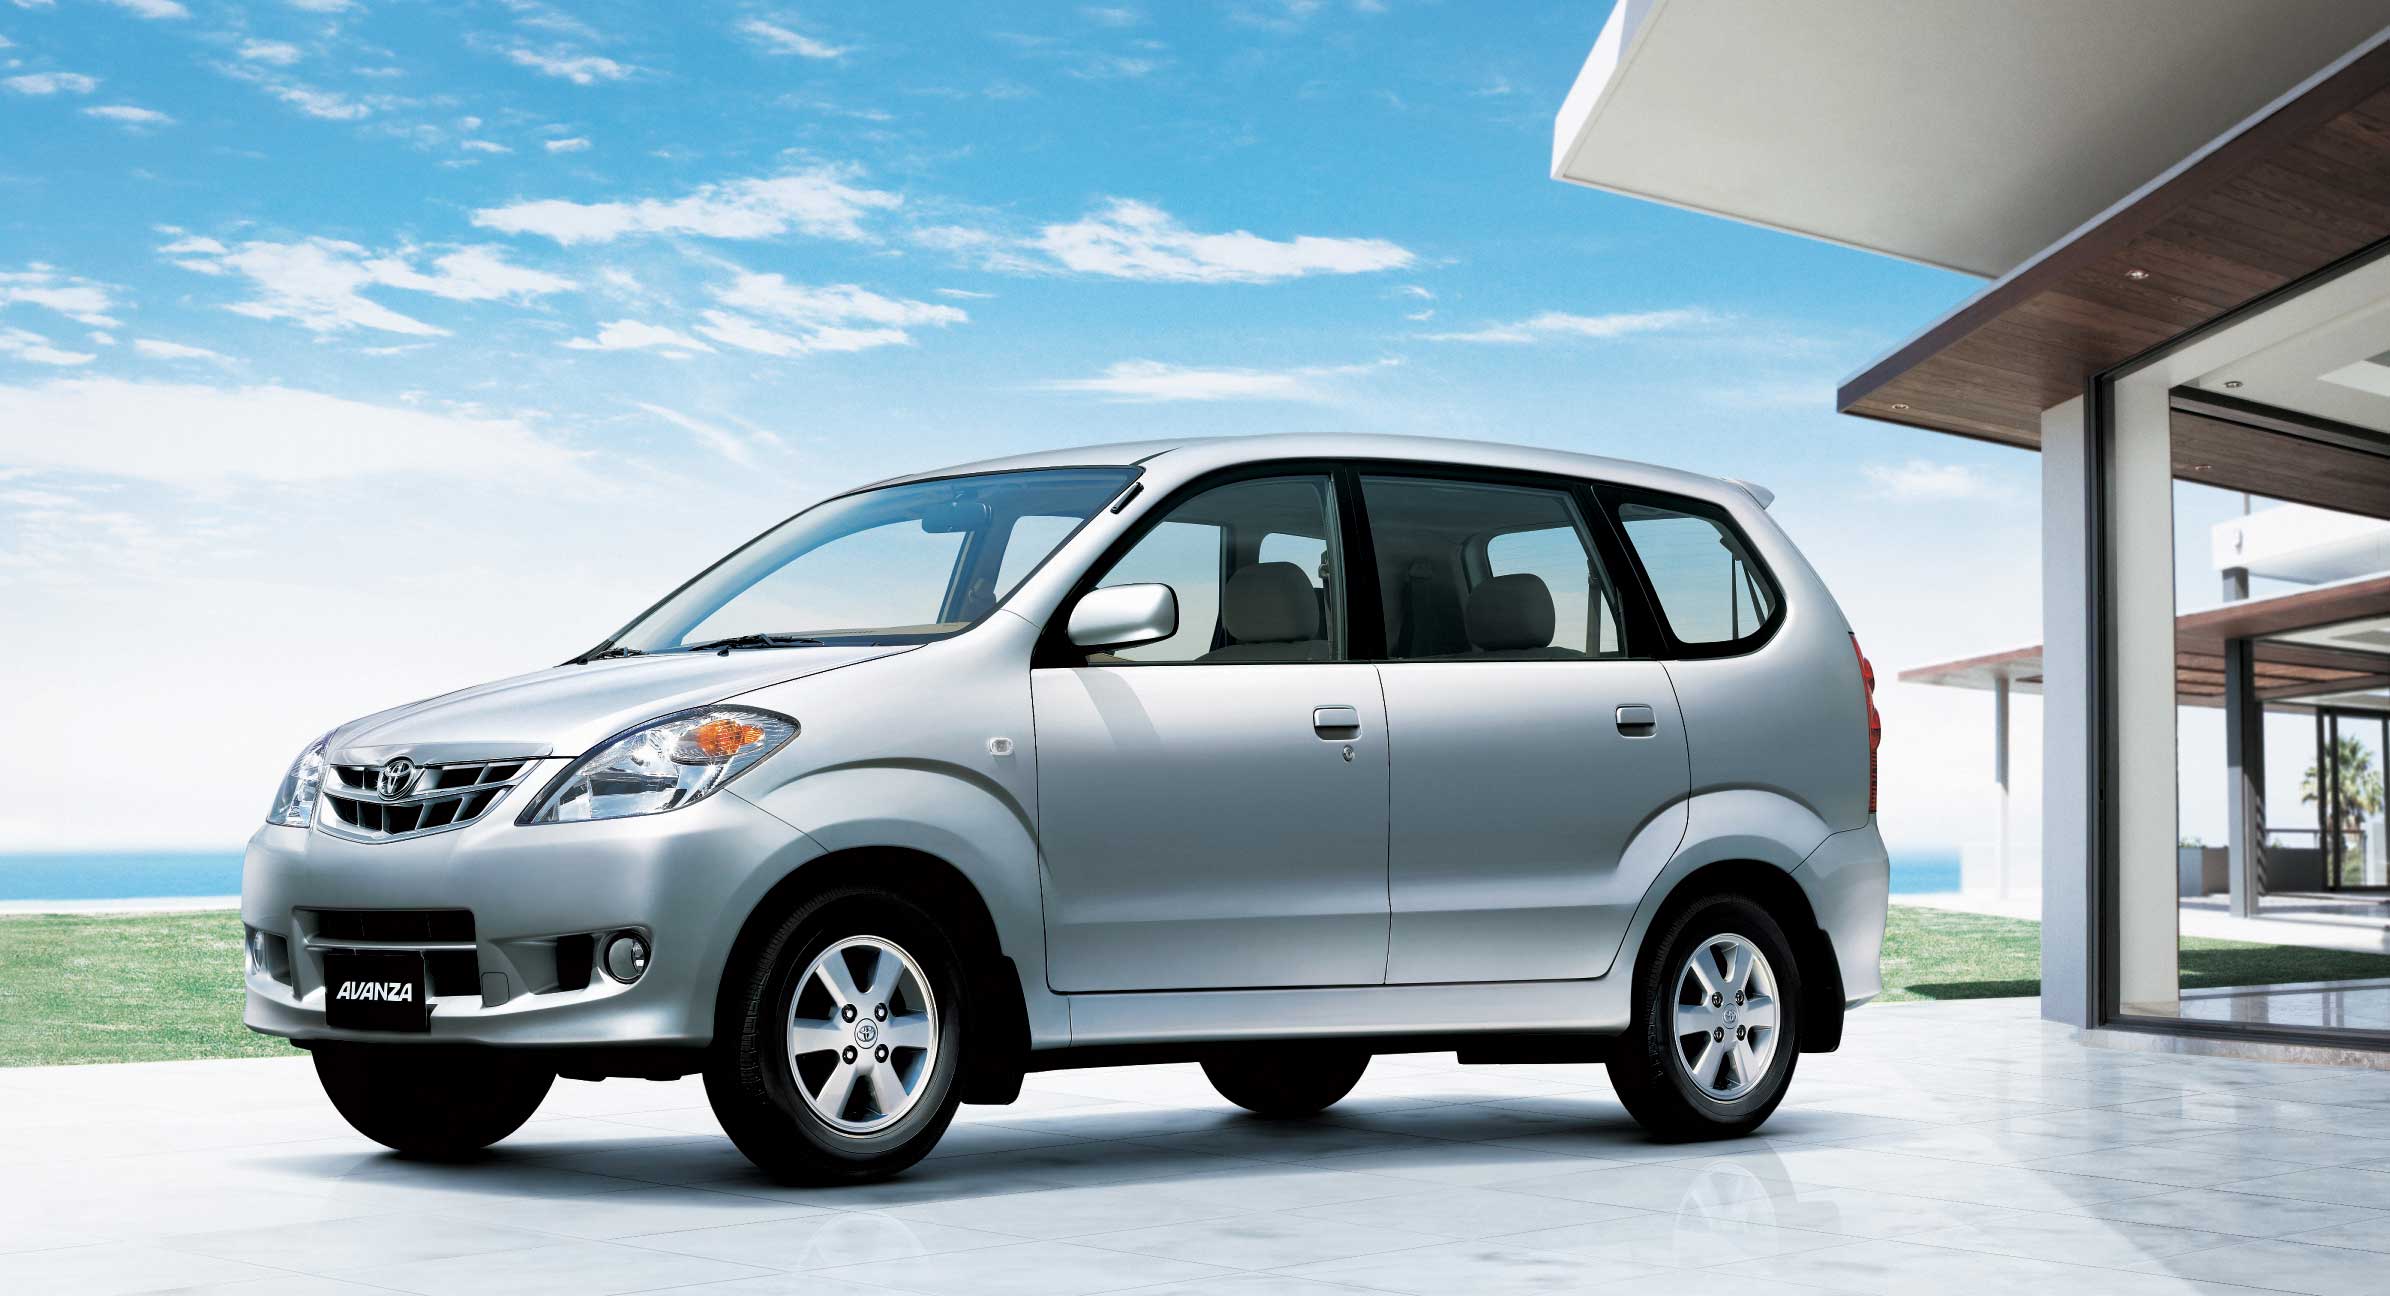 registrations and a whopping 20.6% market share is the Toyota Avanza,